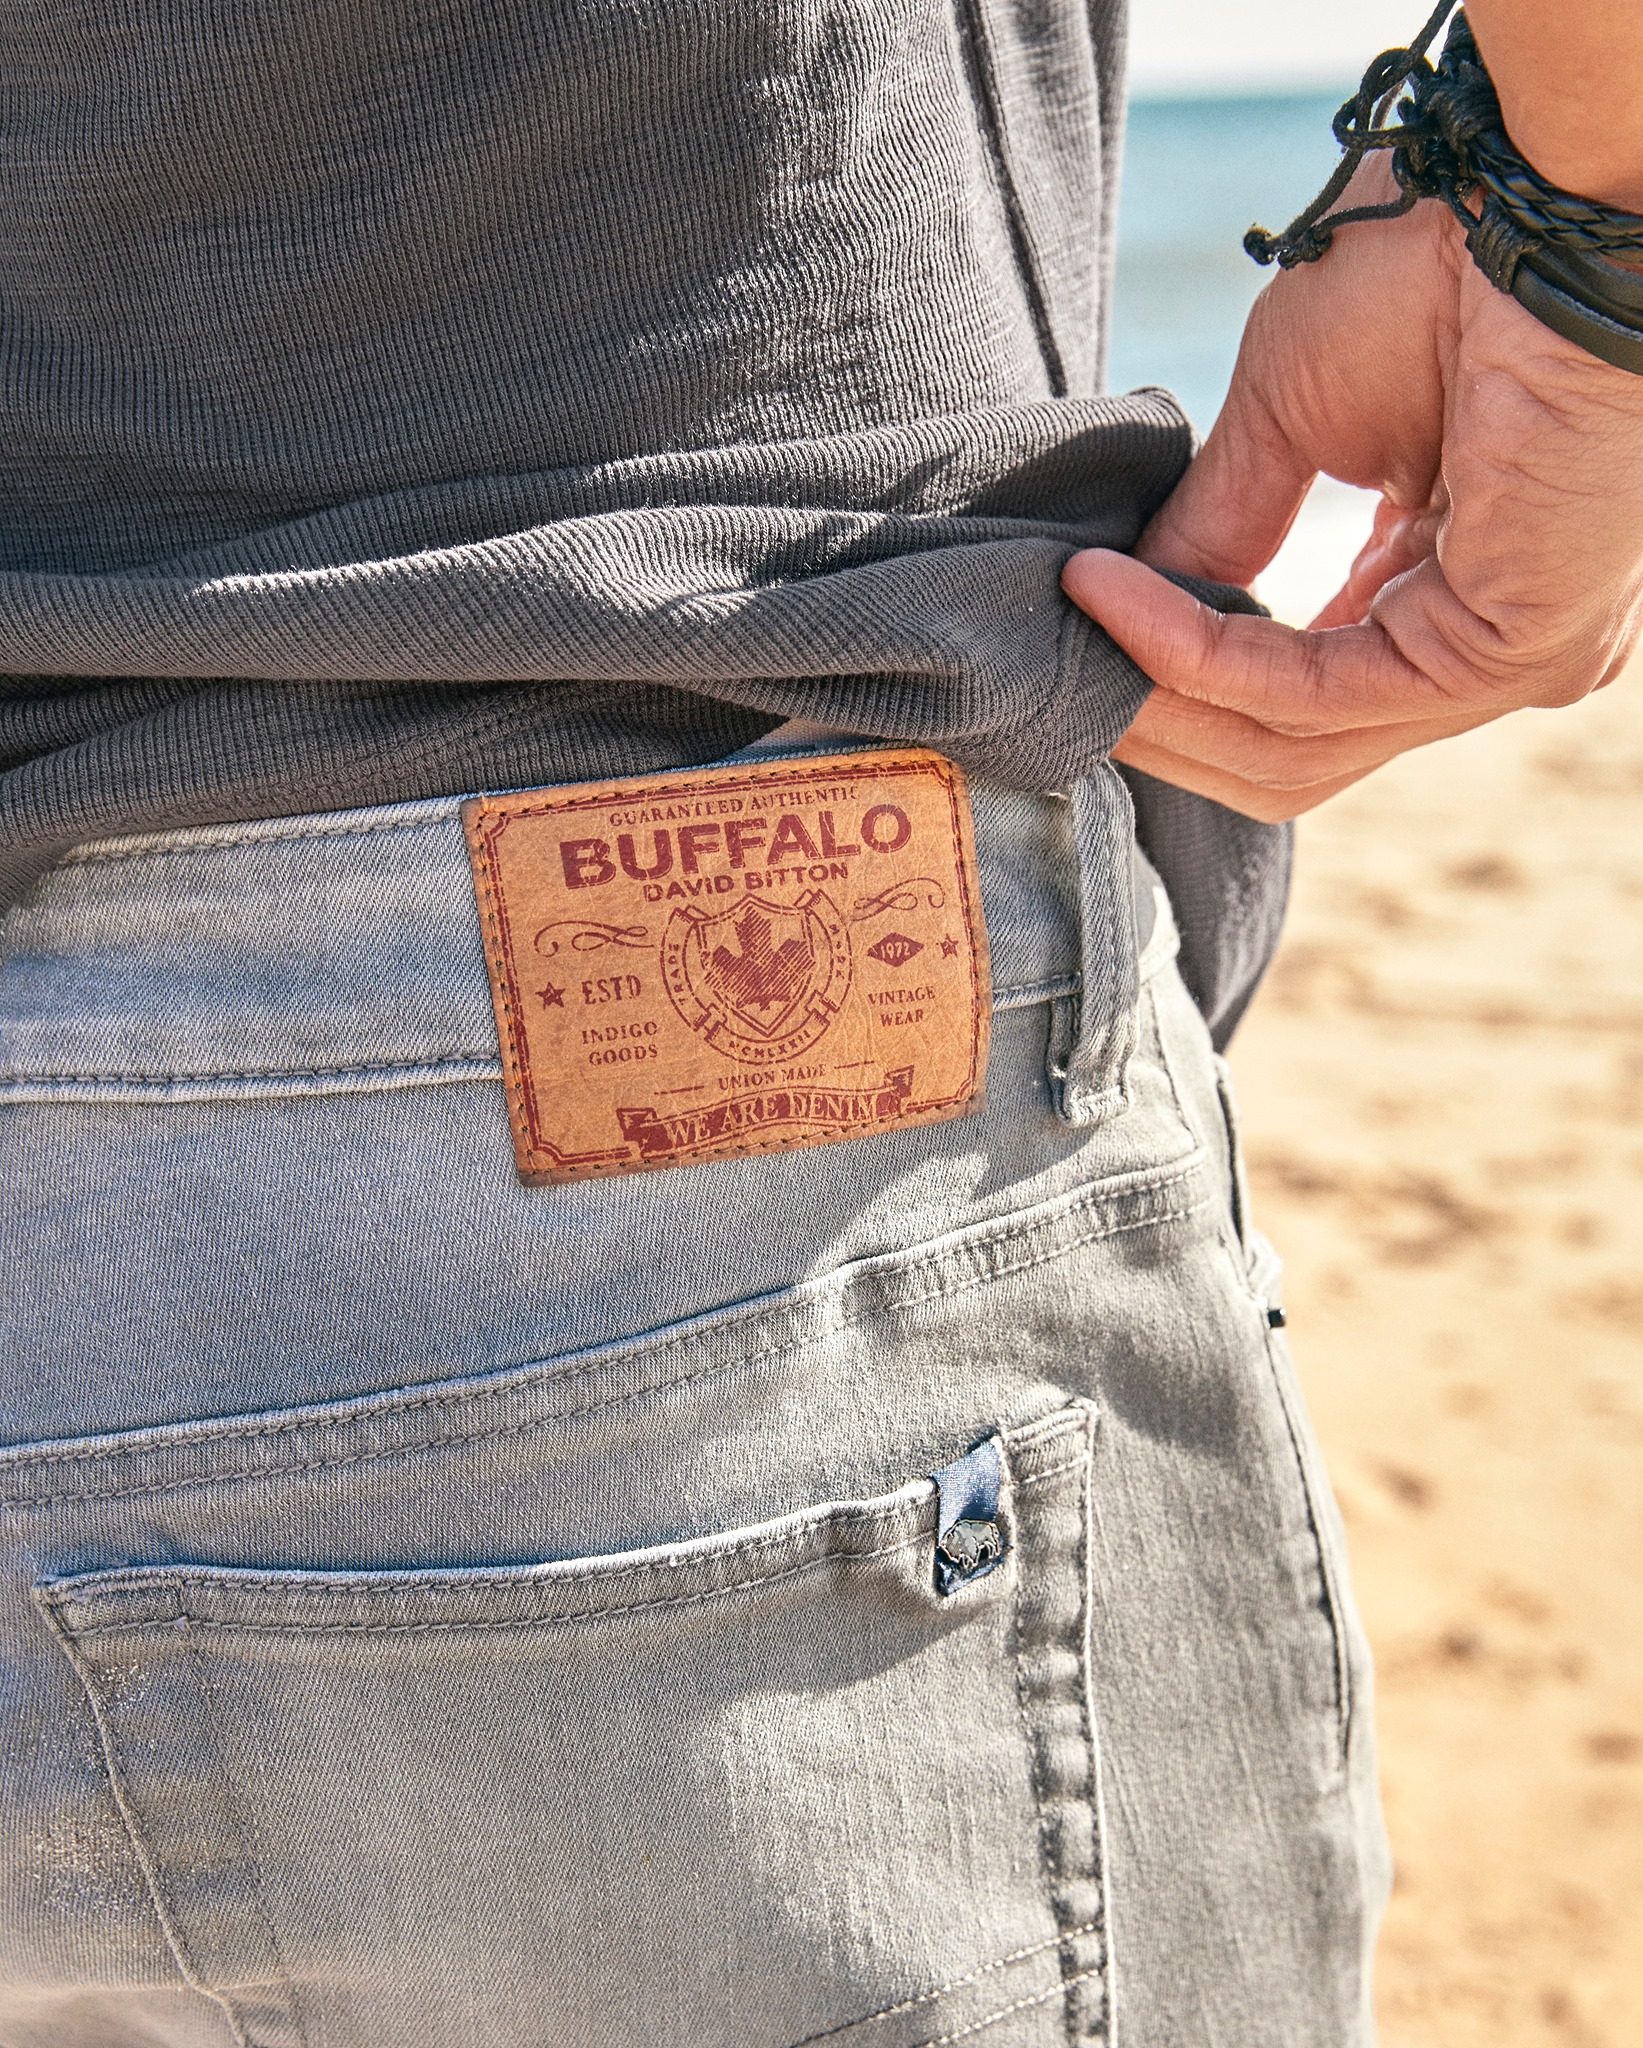 buffalo-jeans-canada-exclusive-promo-code-save-25-off-canadian